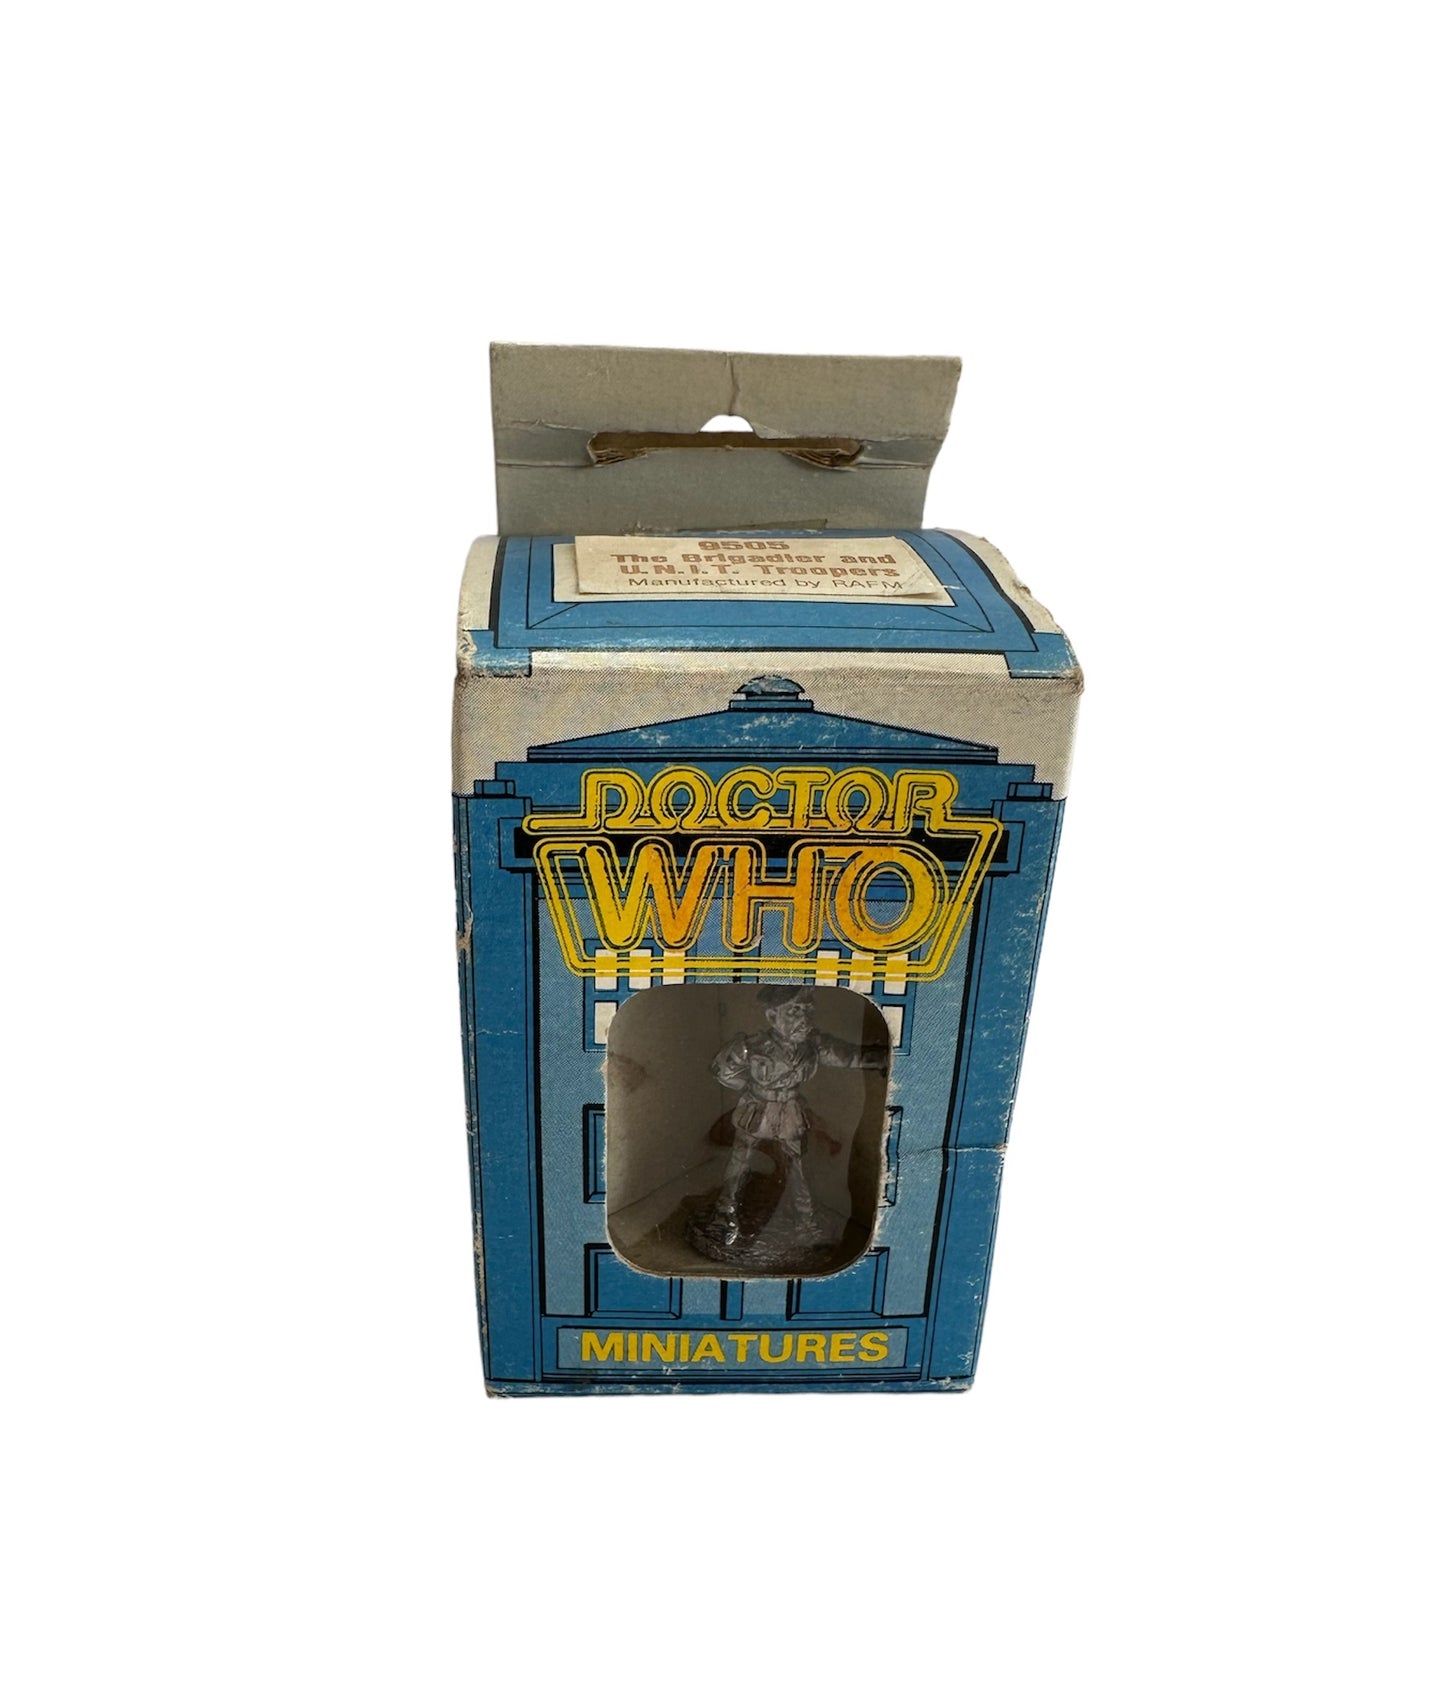 Vintage FASA Corp 1986 Doctor Dr Who Citadel Miniatures Metal Figures No. 9505 - The Brigadier And UNIT Troopers - Set Of 3 Figures - In The Original Box - Shop Stock Room Find